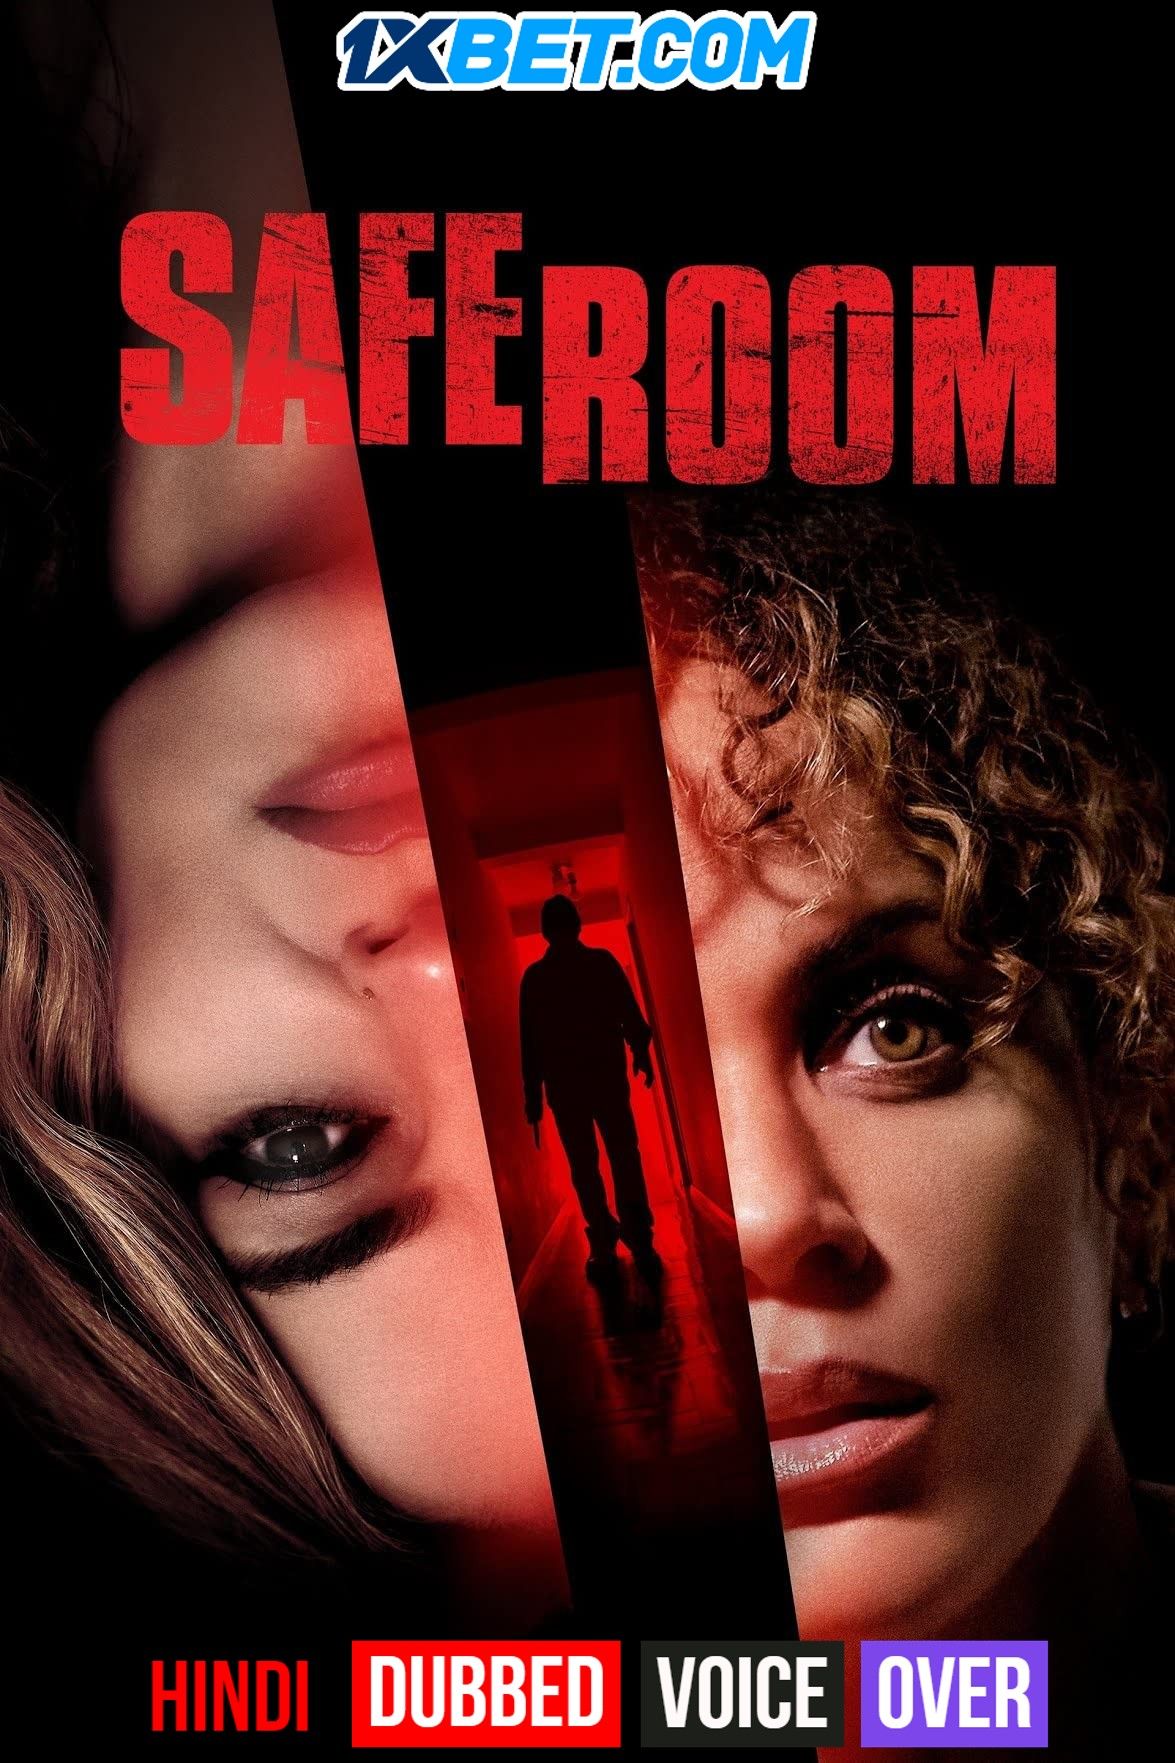 Safe Space (2022) Hindi (Voice Over) Dubbed HDTV download full movie